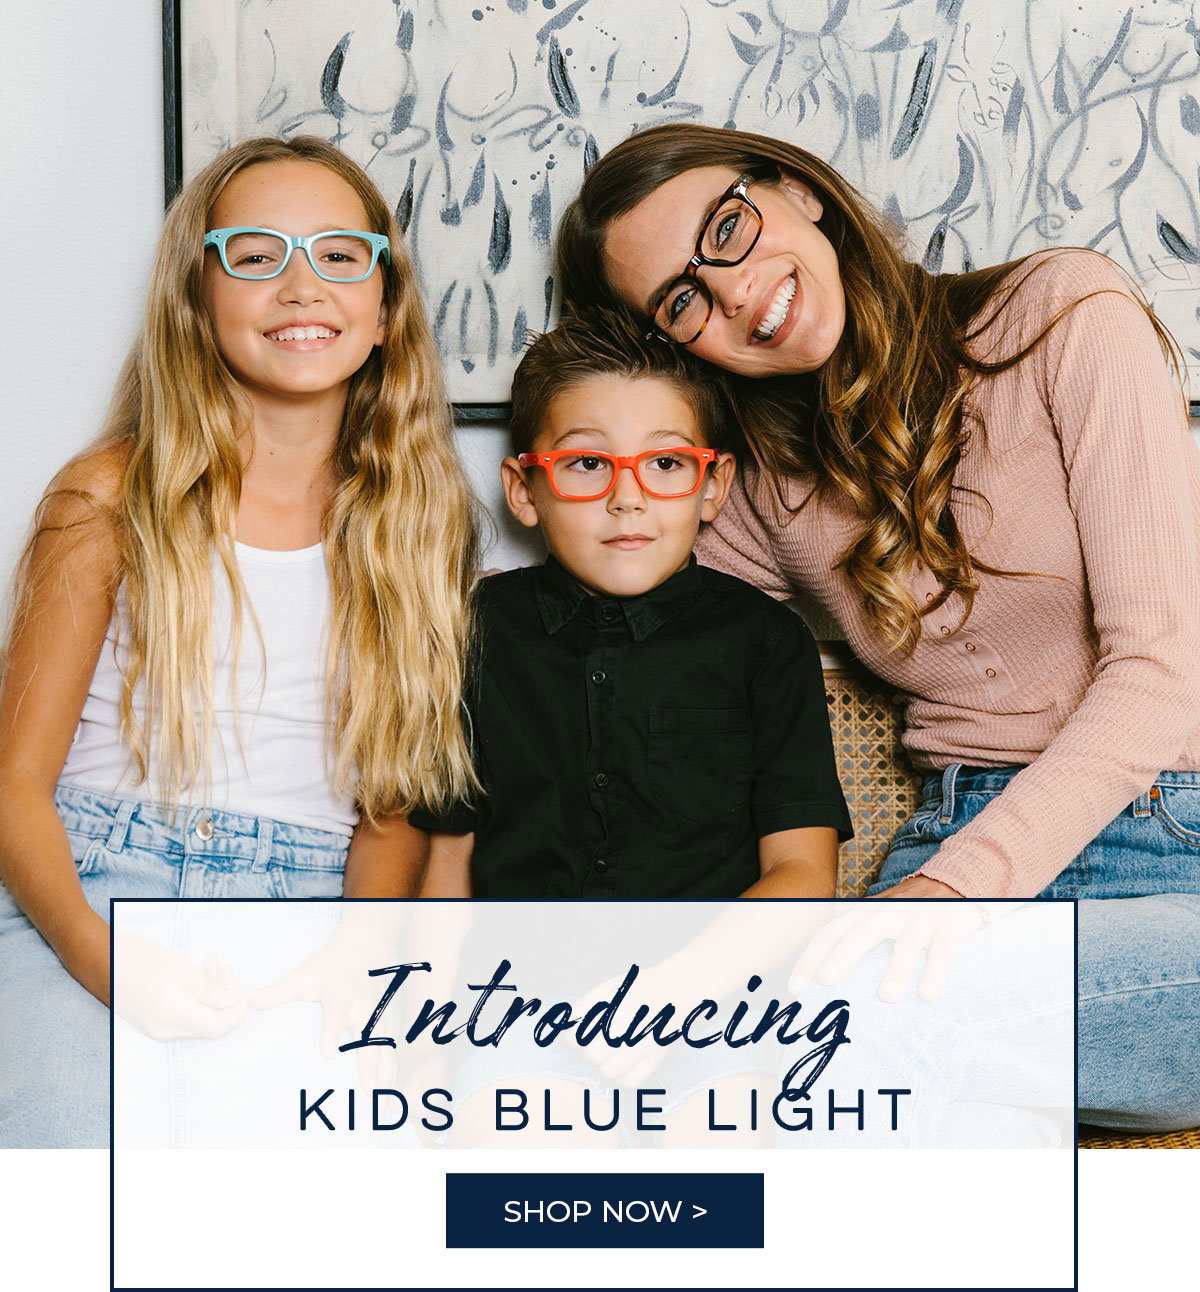 Peepers Simply Kids Blue Light Glasses Red